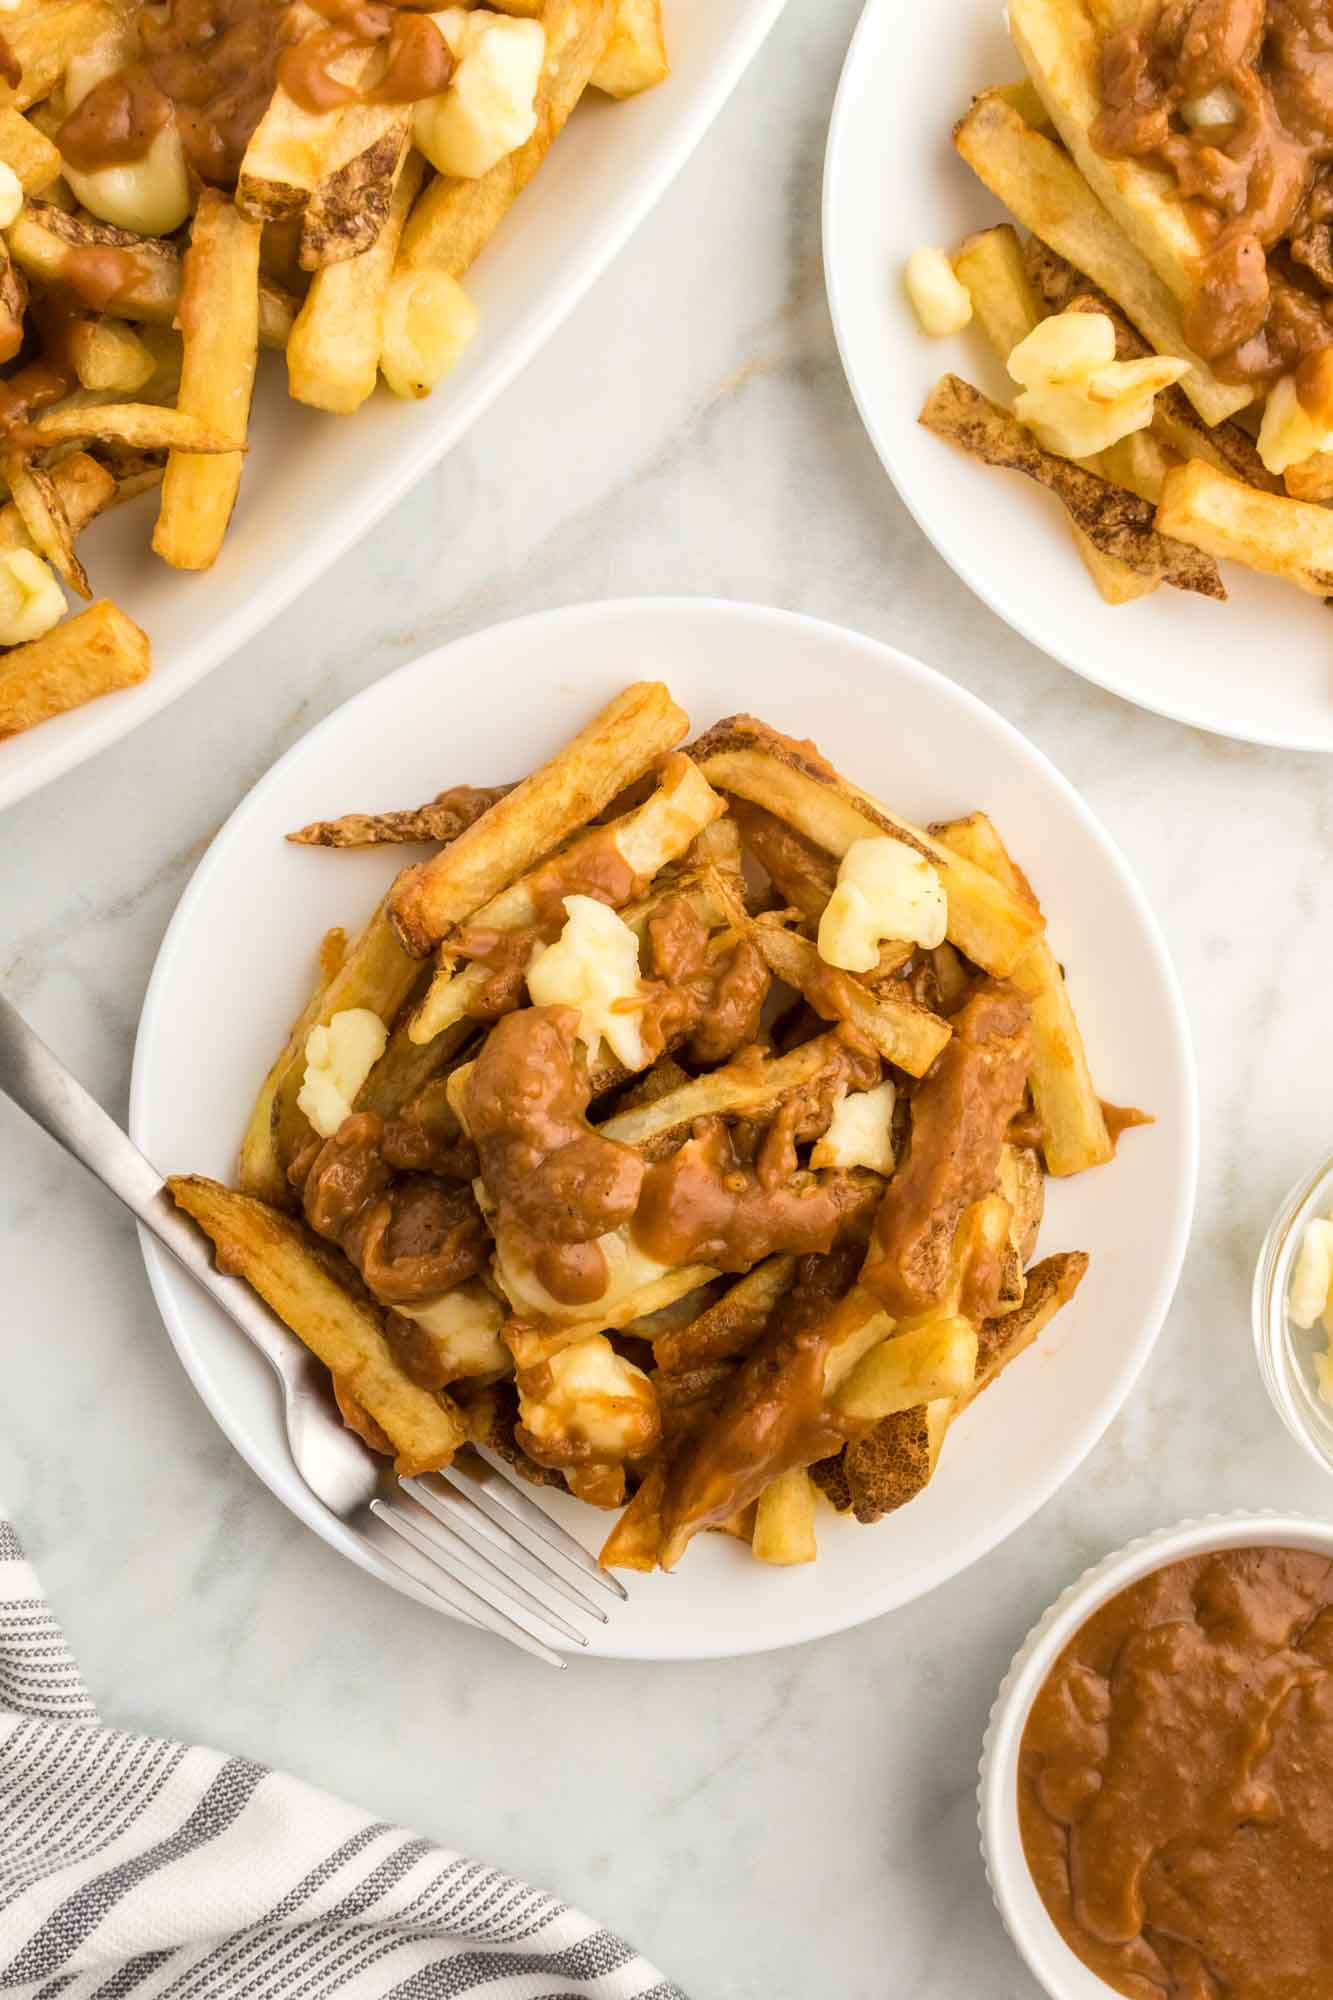 Poutine plated in single servings